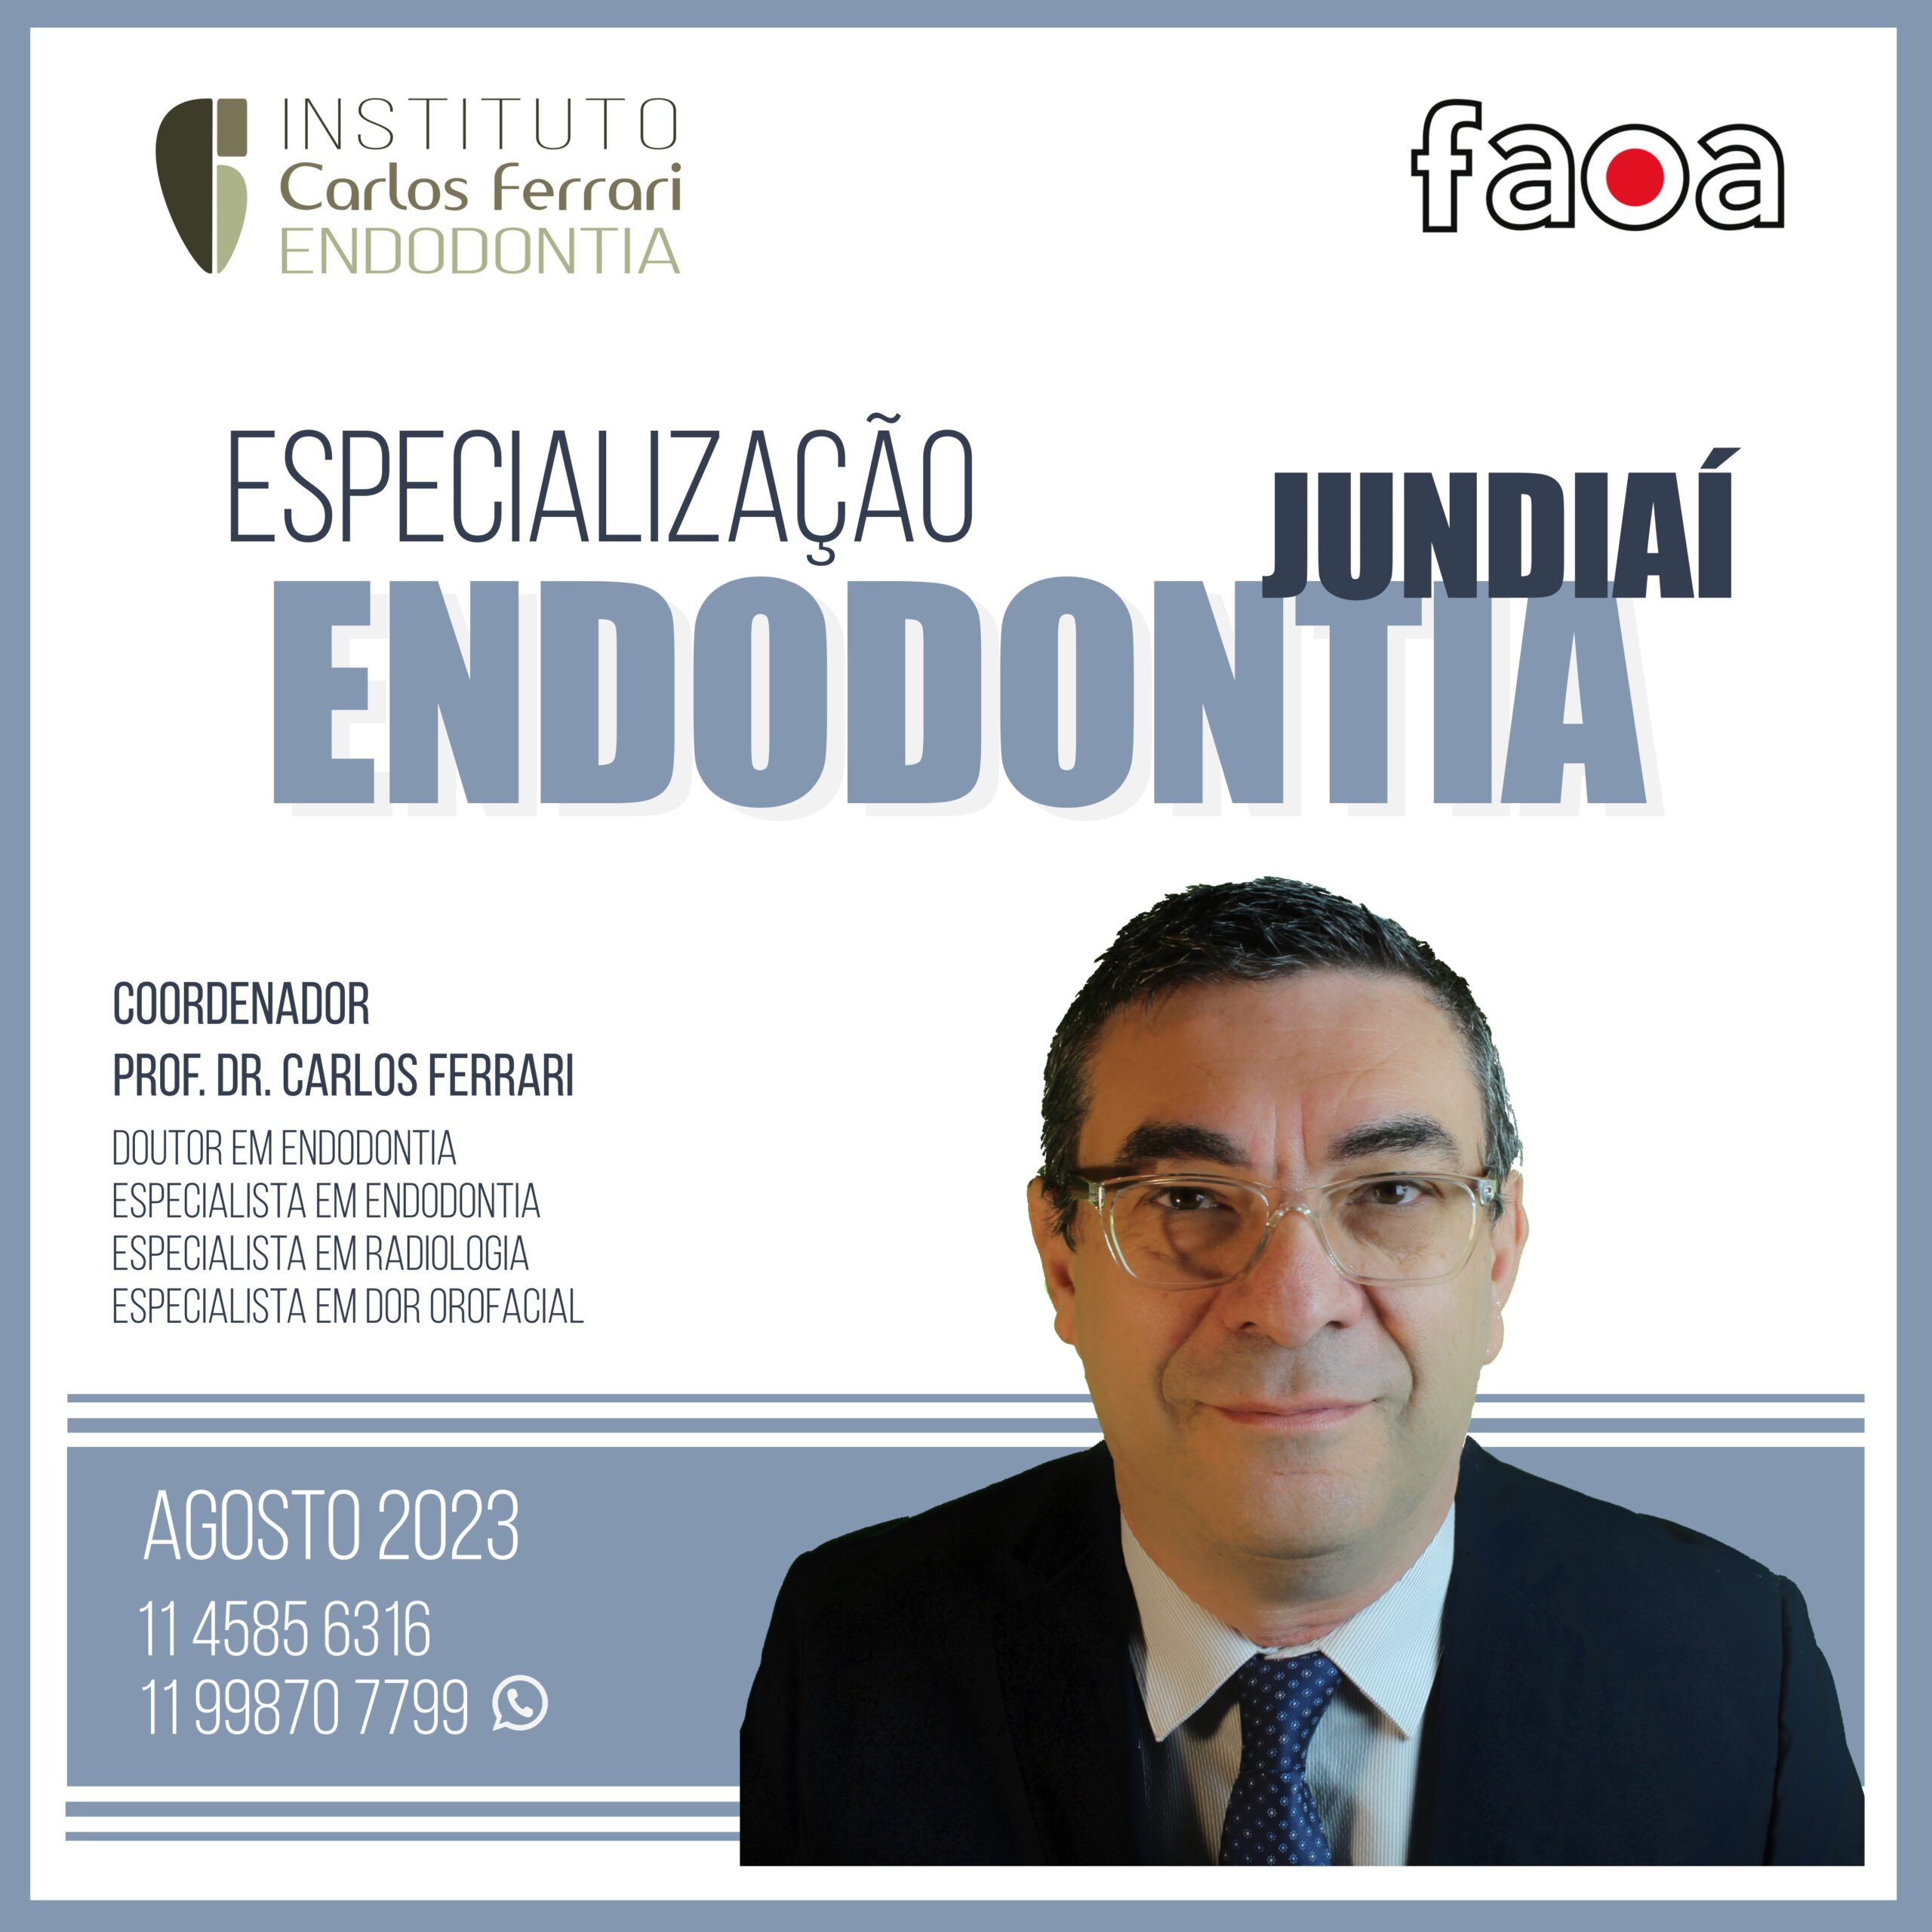 You are currently viewing Specialization in endodontics in Jundiaí.